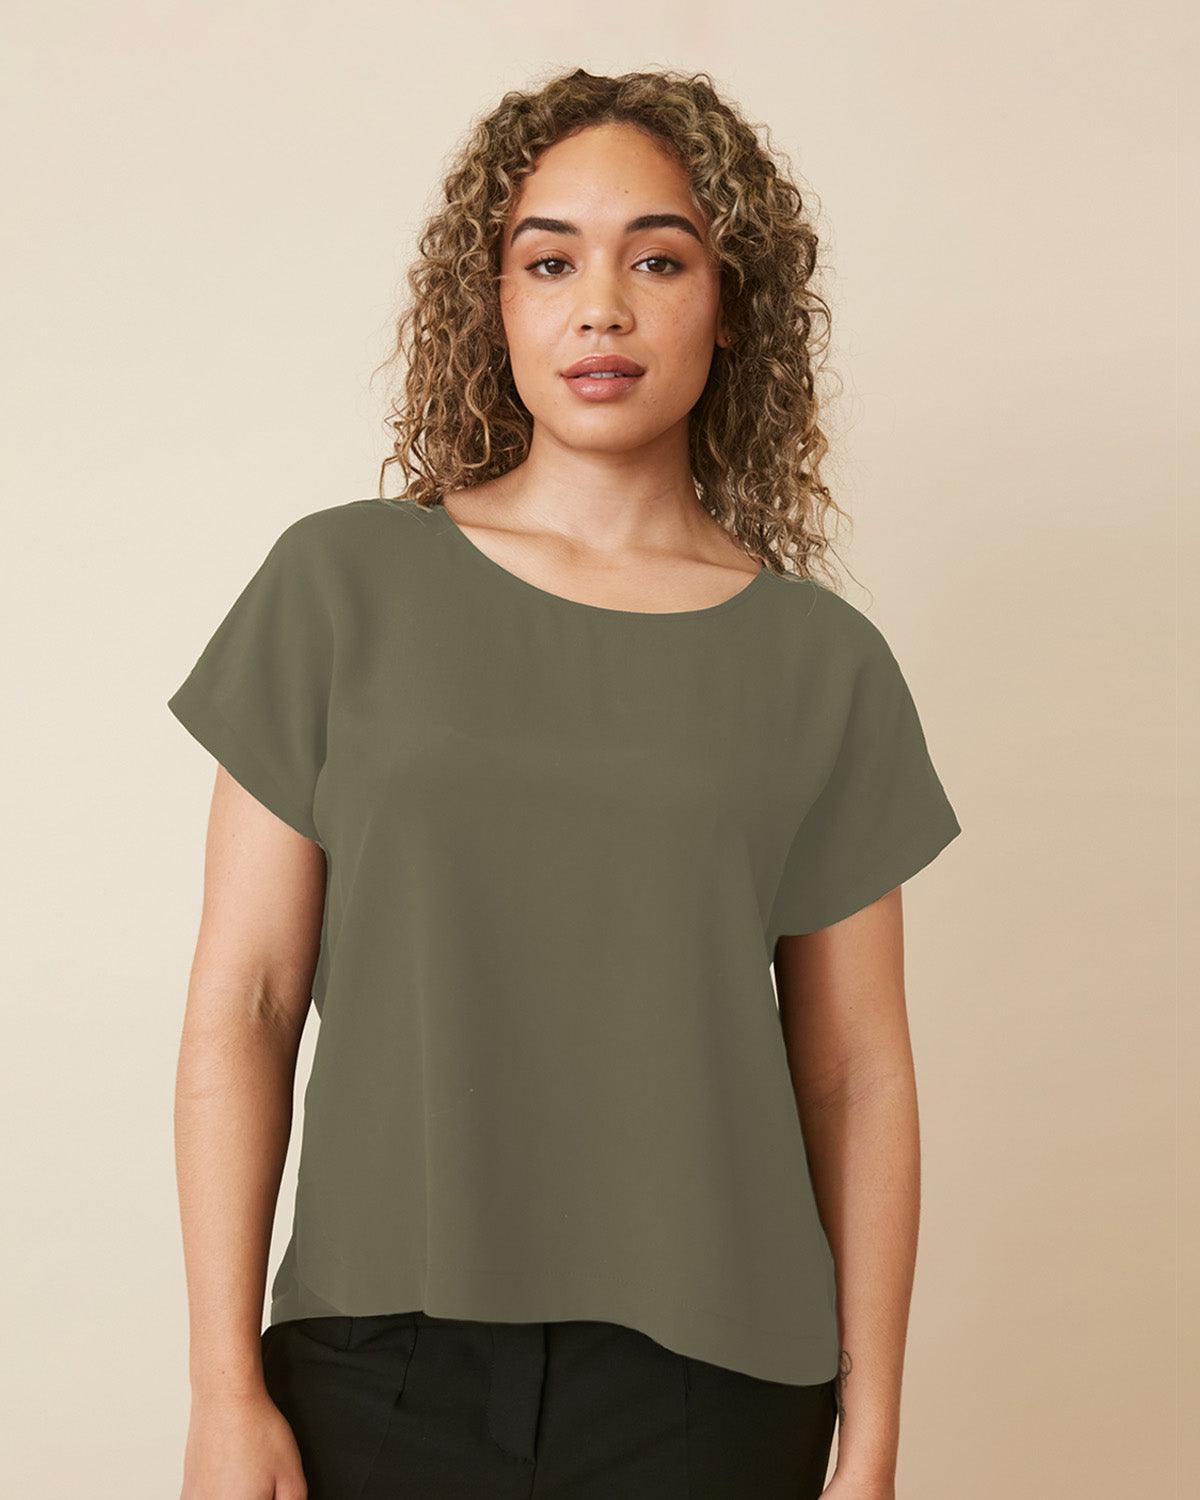 "#color_MOSS|Zoe is 5'8", wearing a size M